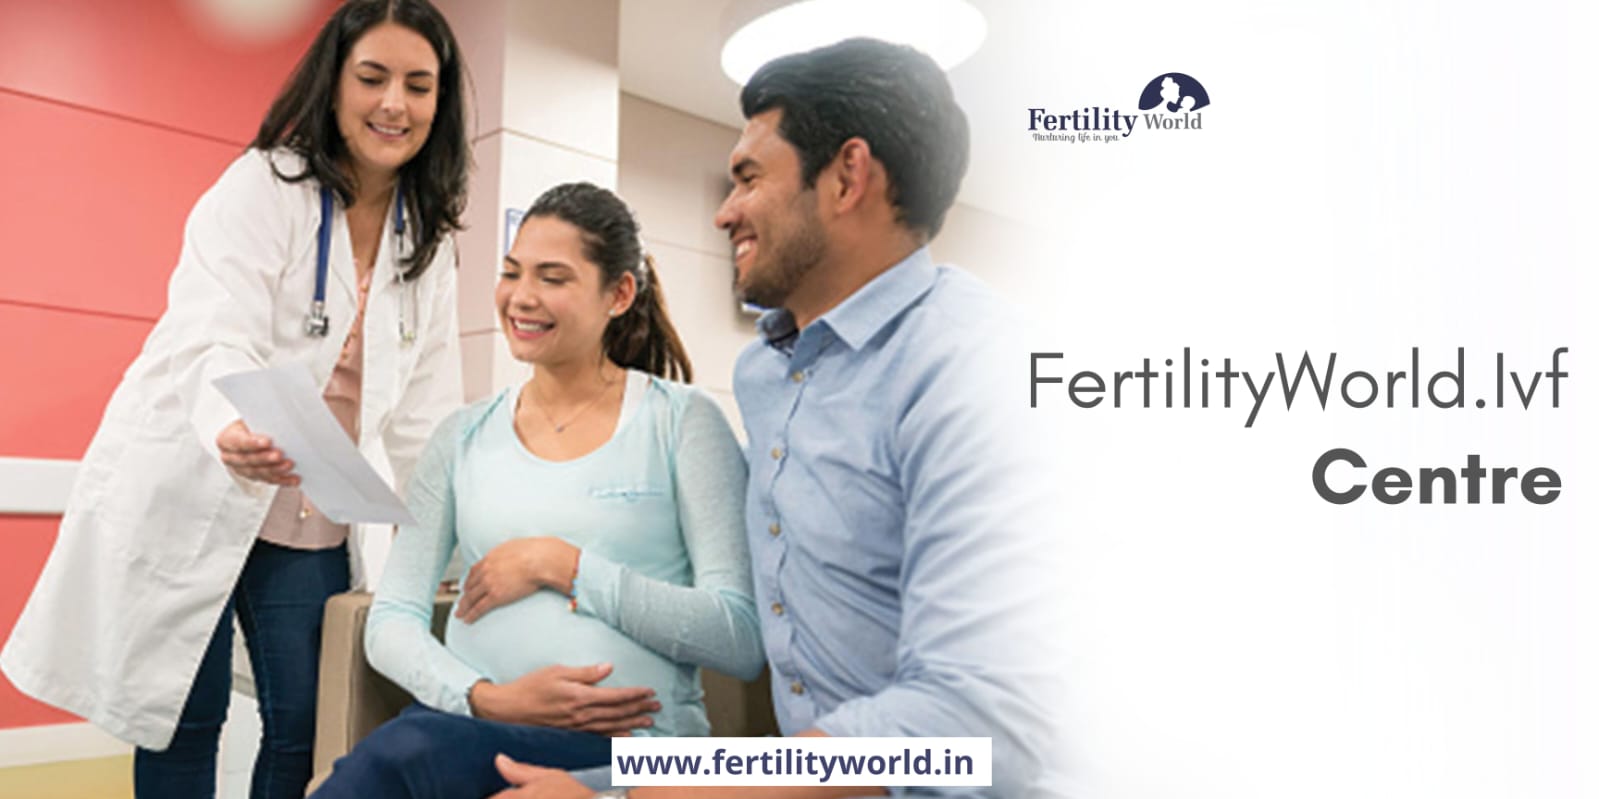 Get in touch with the best IVF Clinics in the USA